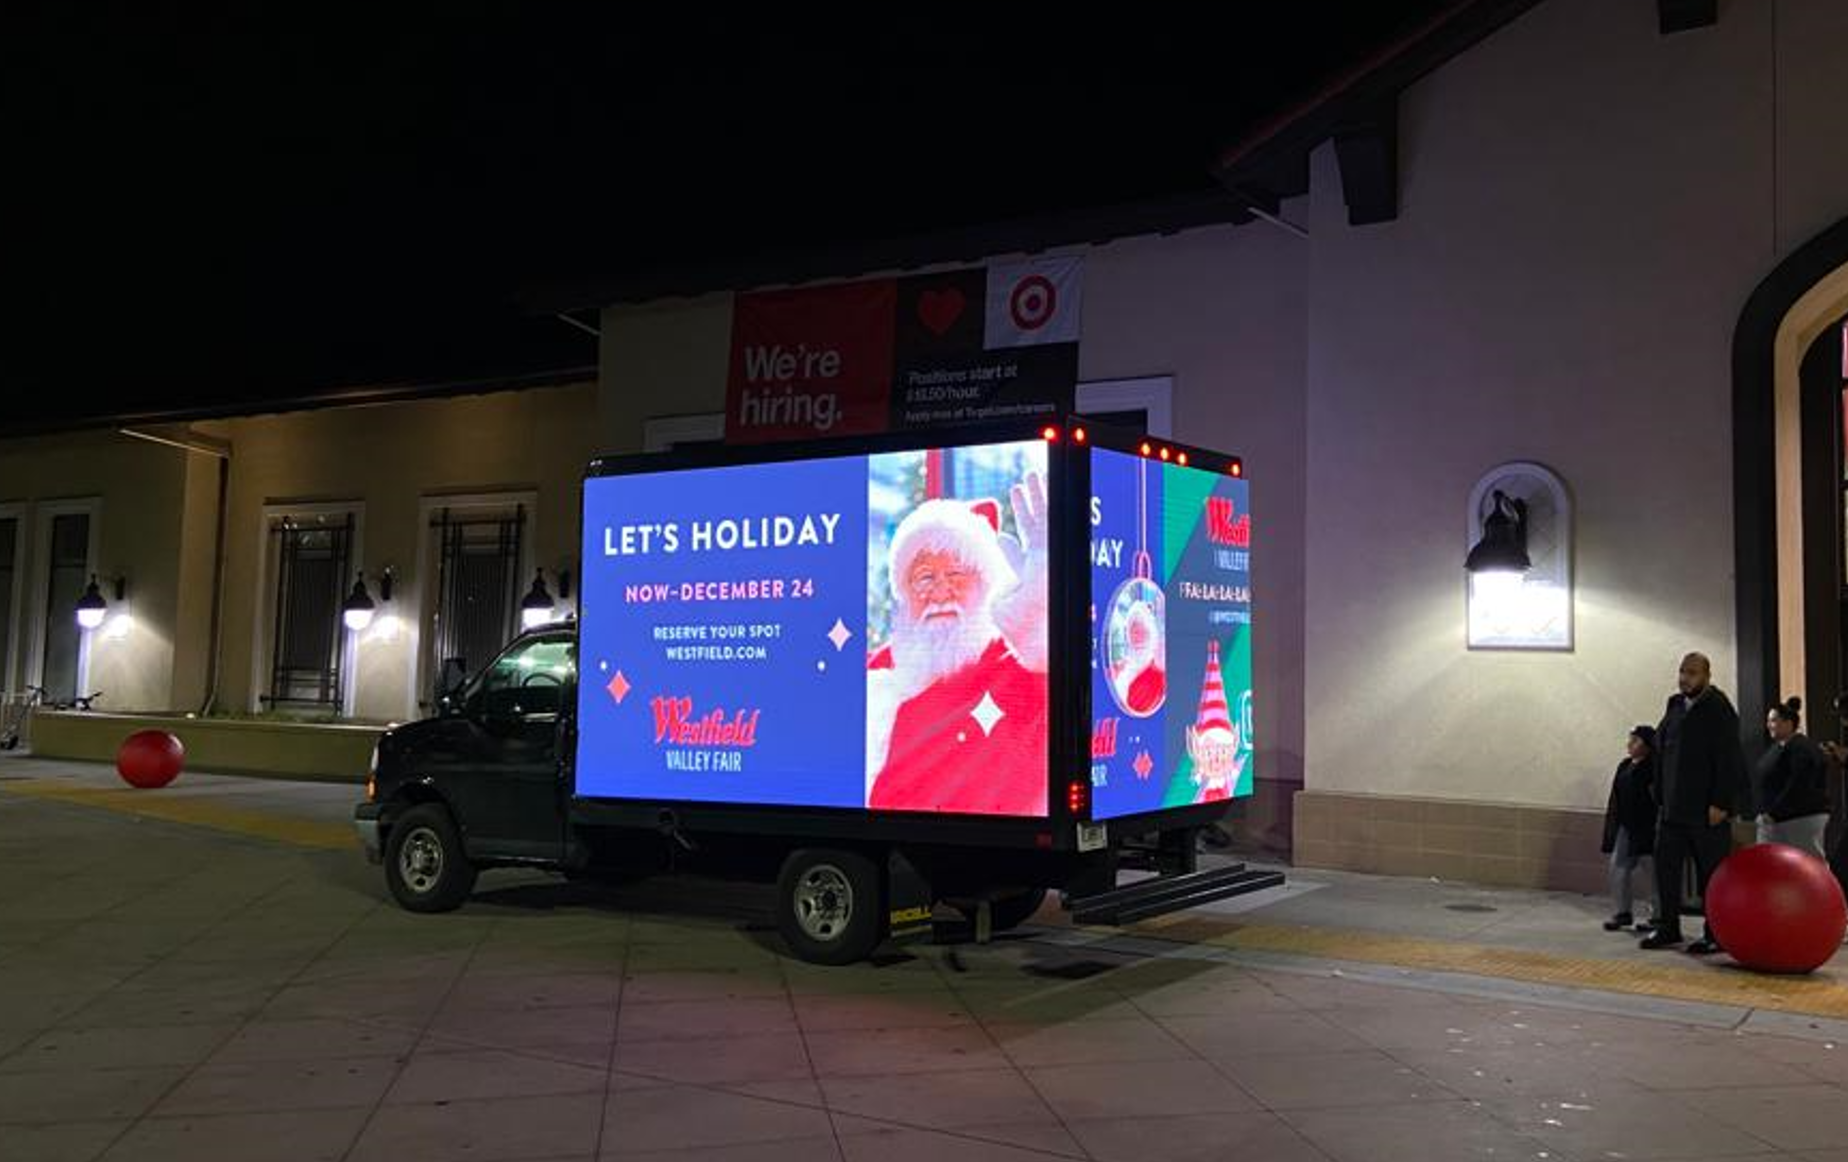 A Cantmiss.US digital mobile billboard truck showcasing holiday advertisements by Westfield Valley Fair, parked near a bustling shopping area in the evening.